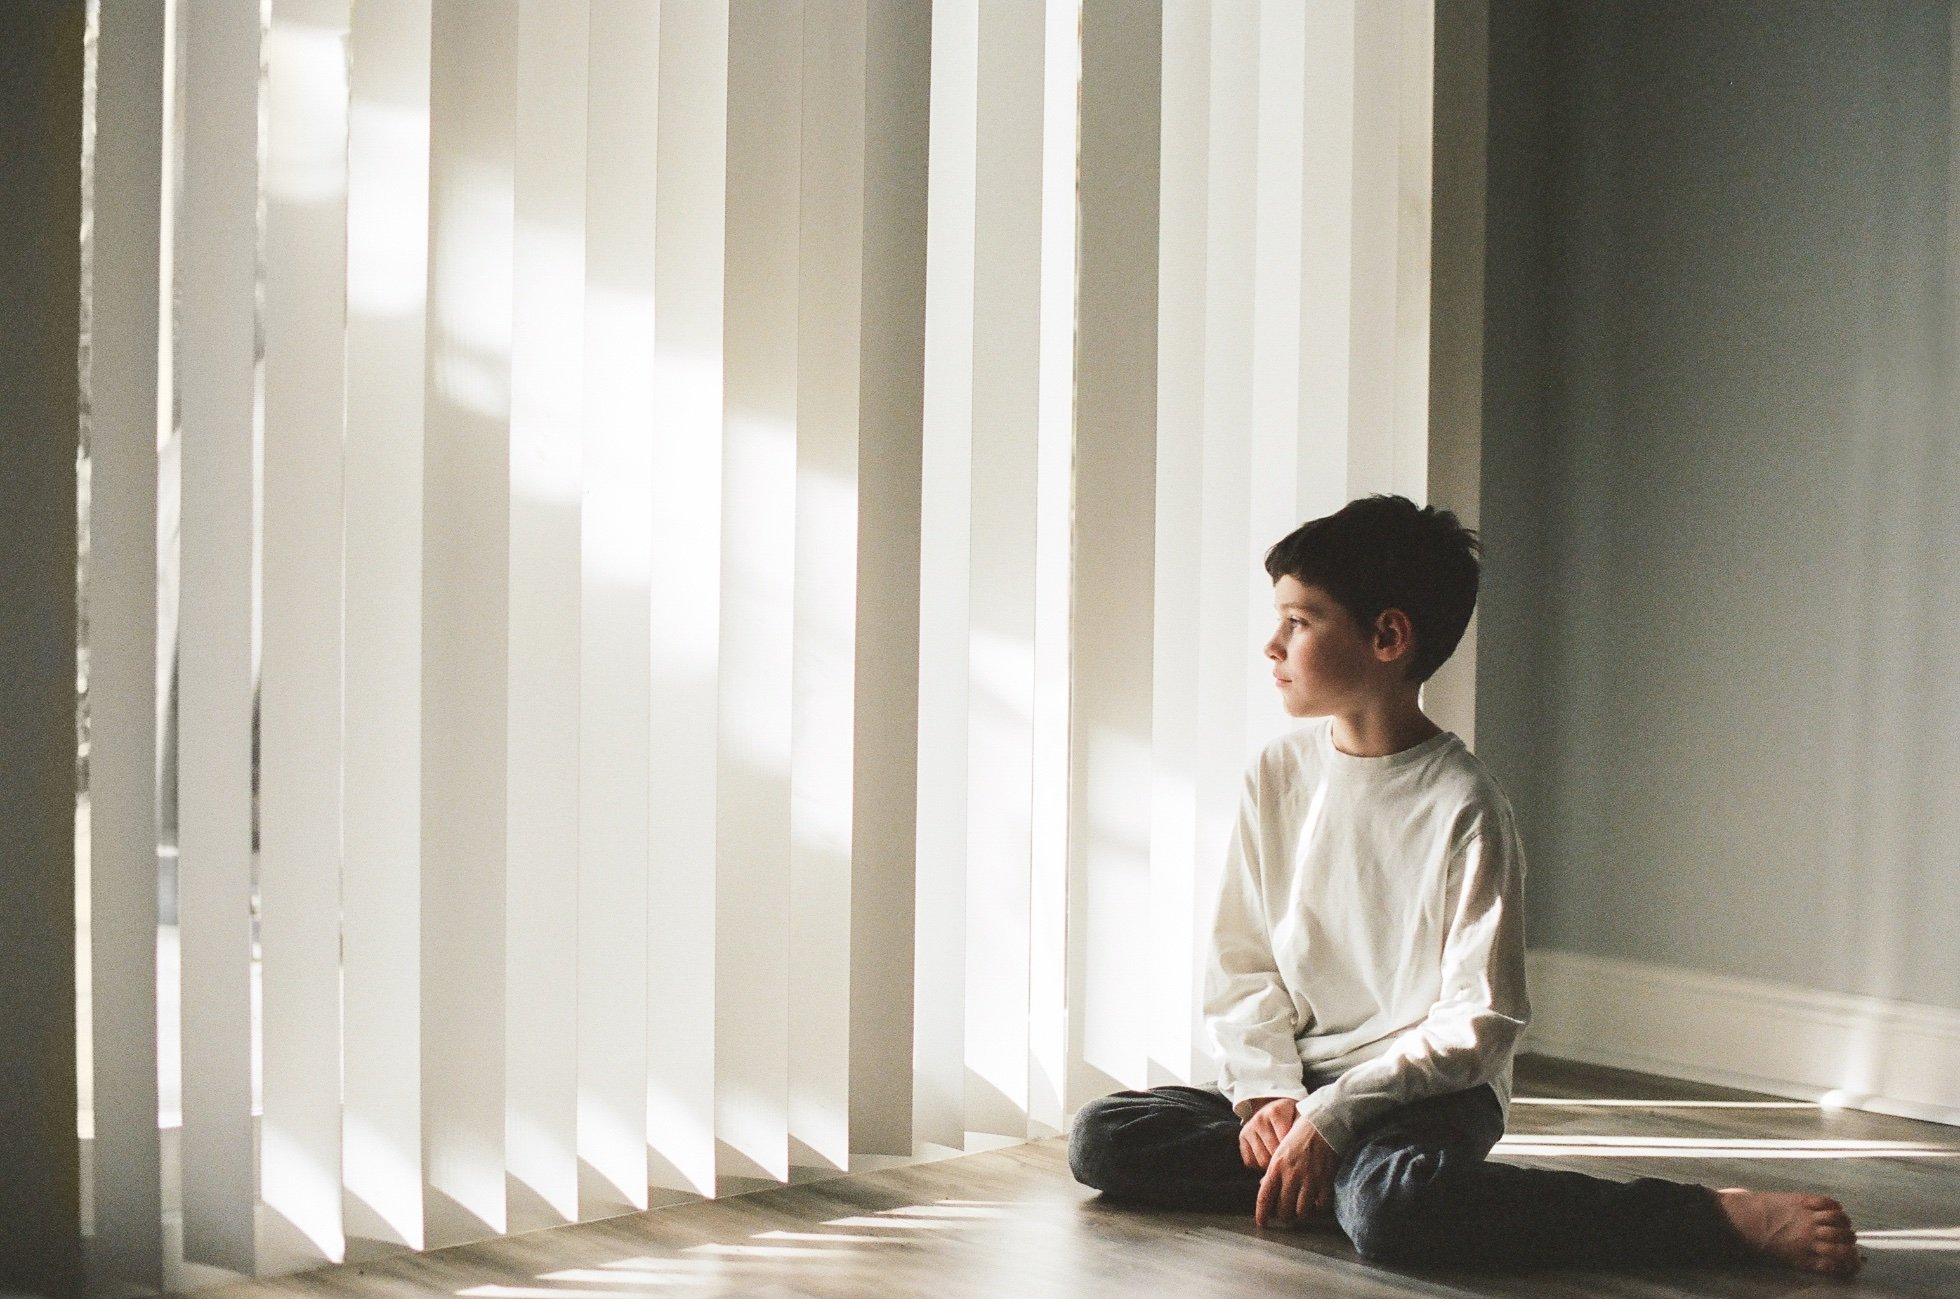 A young boy is engrossed in an activity as he sits on the floor in front of the blinds.